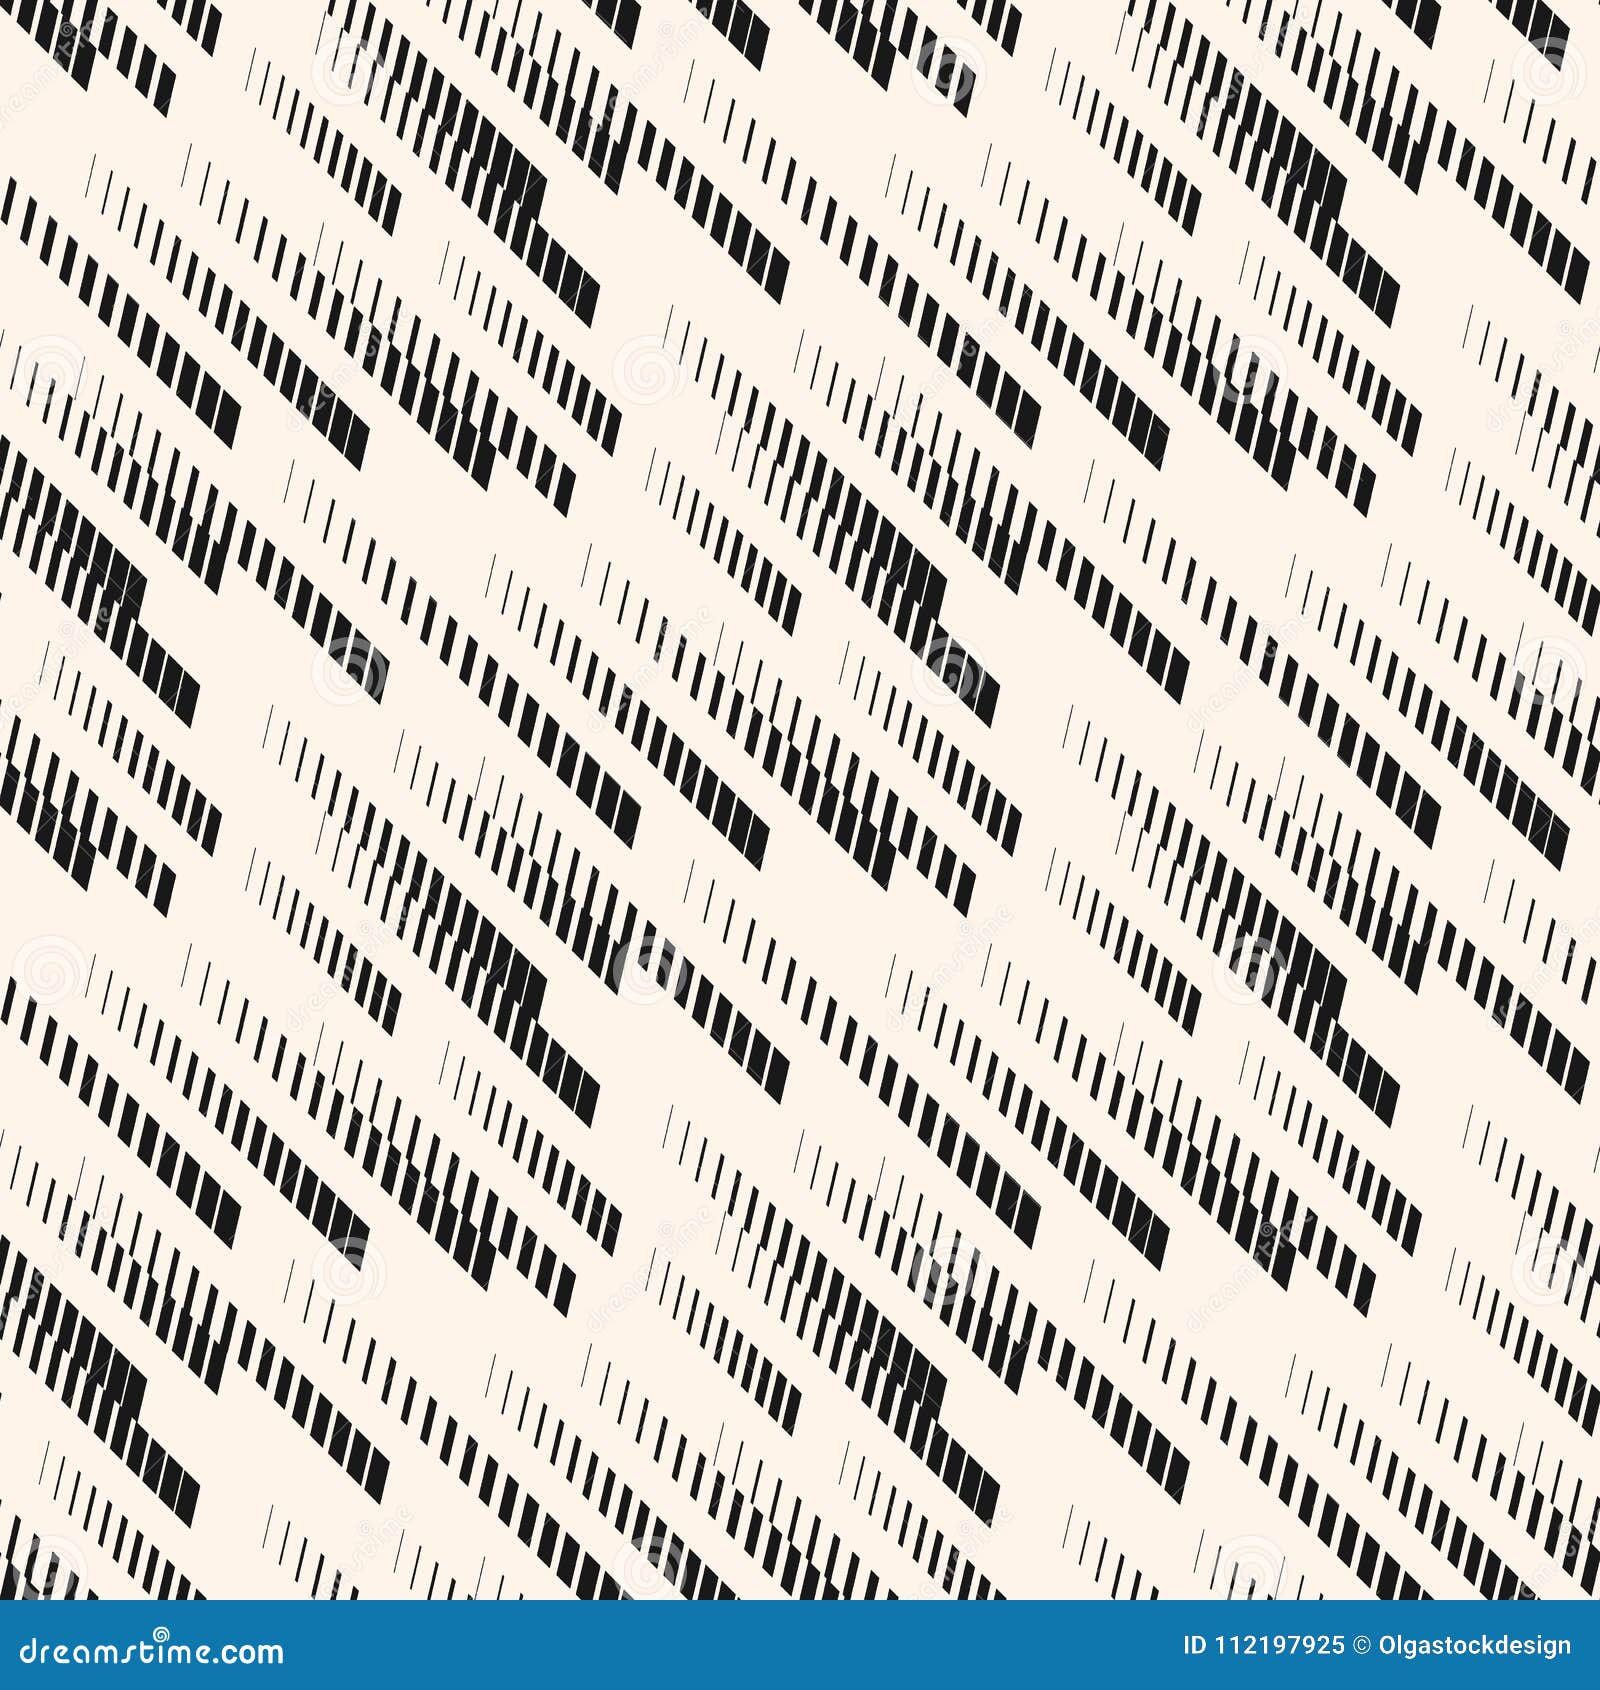 Abstract geometric seamless pattern with diagonal fade lines, tracks,  halftone stripes. Extreme sport style illustration, urban art. Trendy black  and white minimal background texture. Sport pattern. Stock Vector